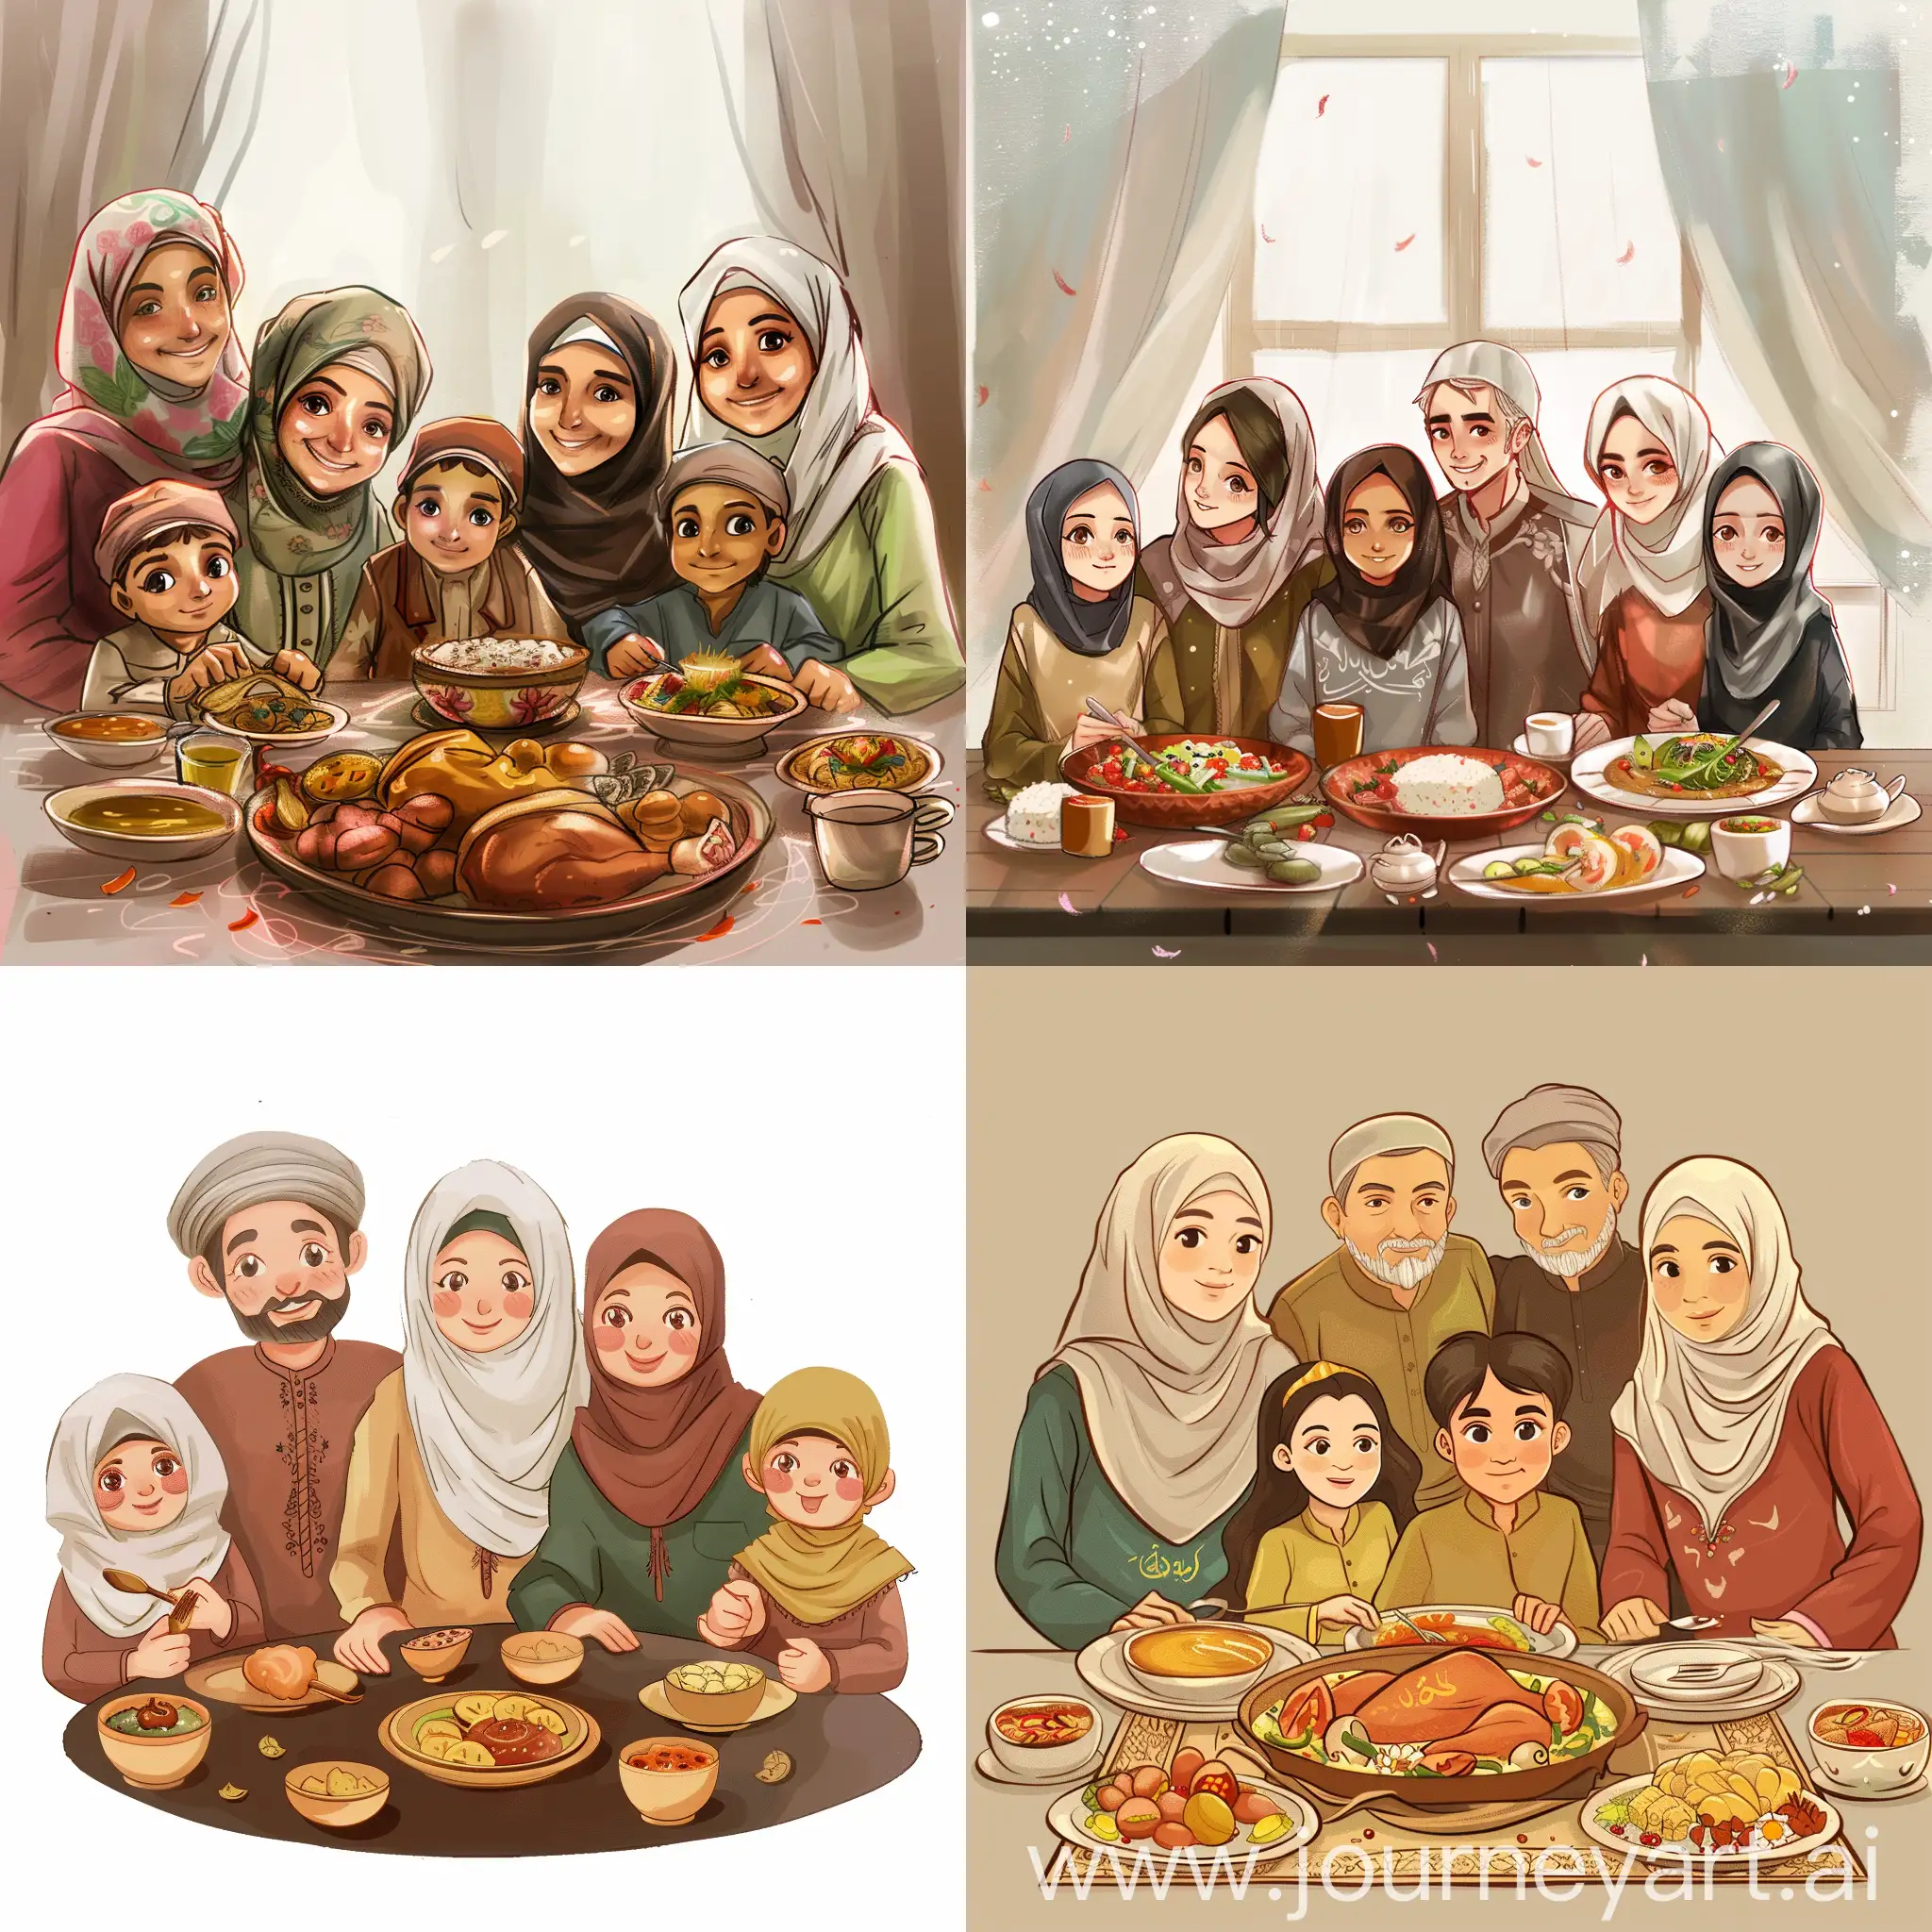 Muslim-Family-Celebrating-Ramadan-with-Traditional-Iftar-Meal